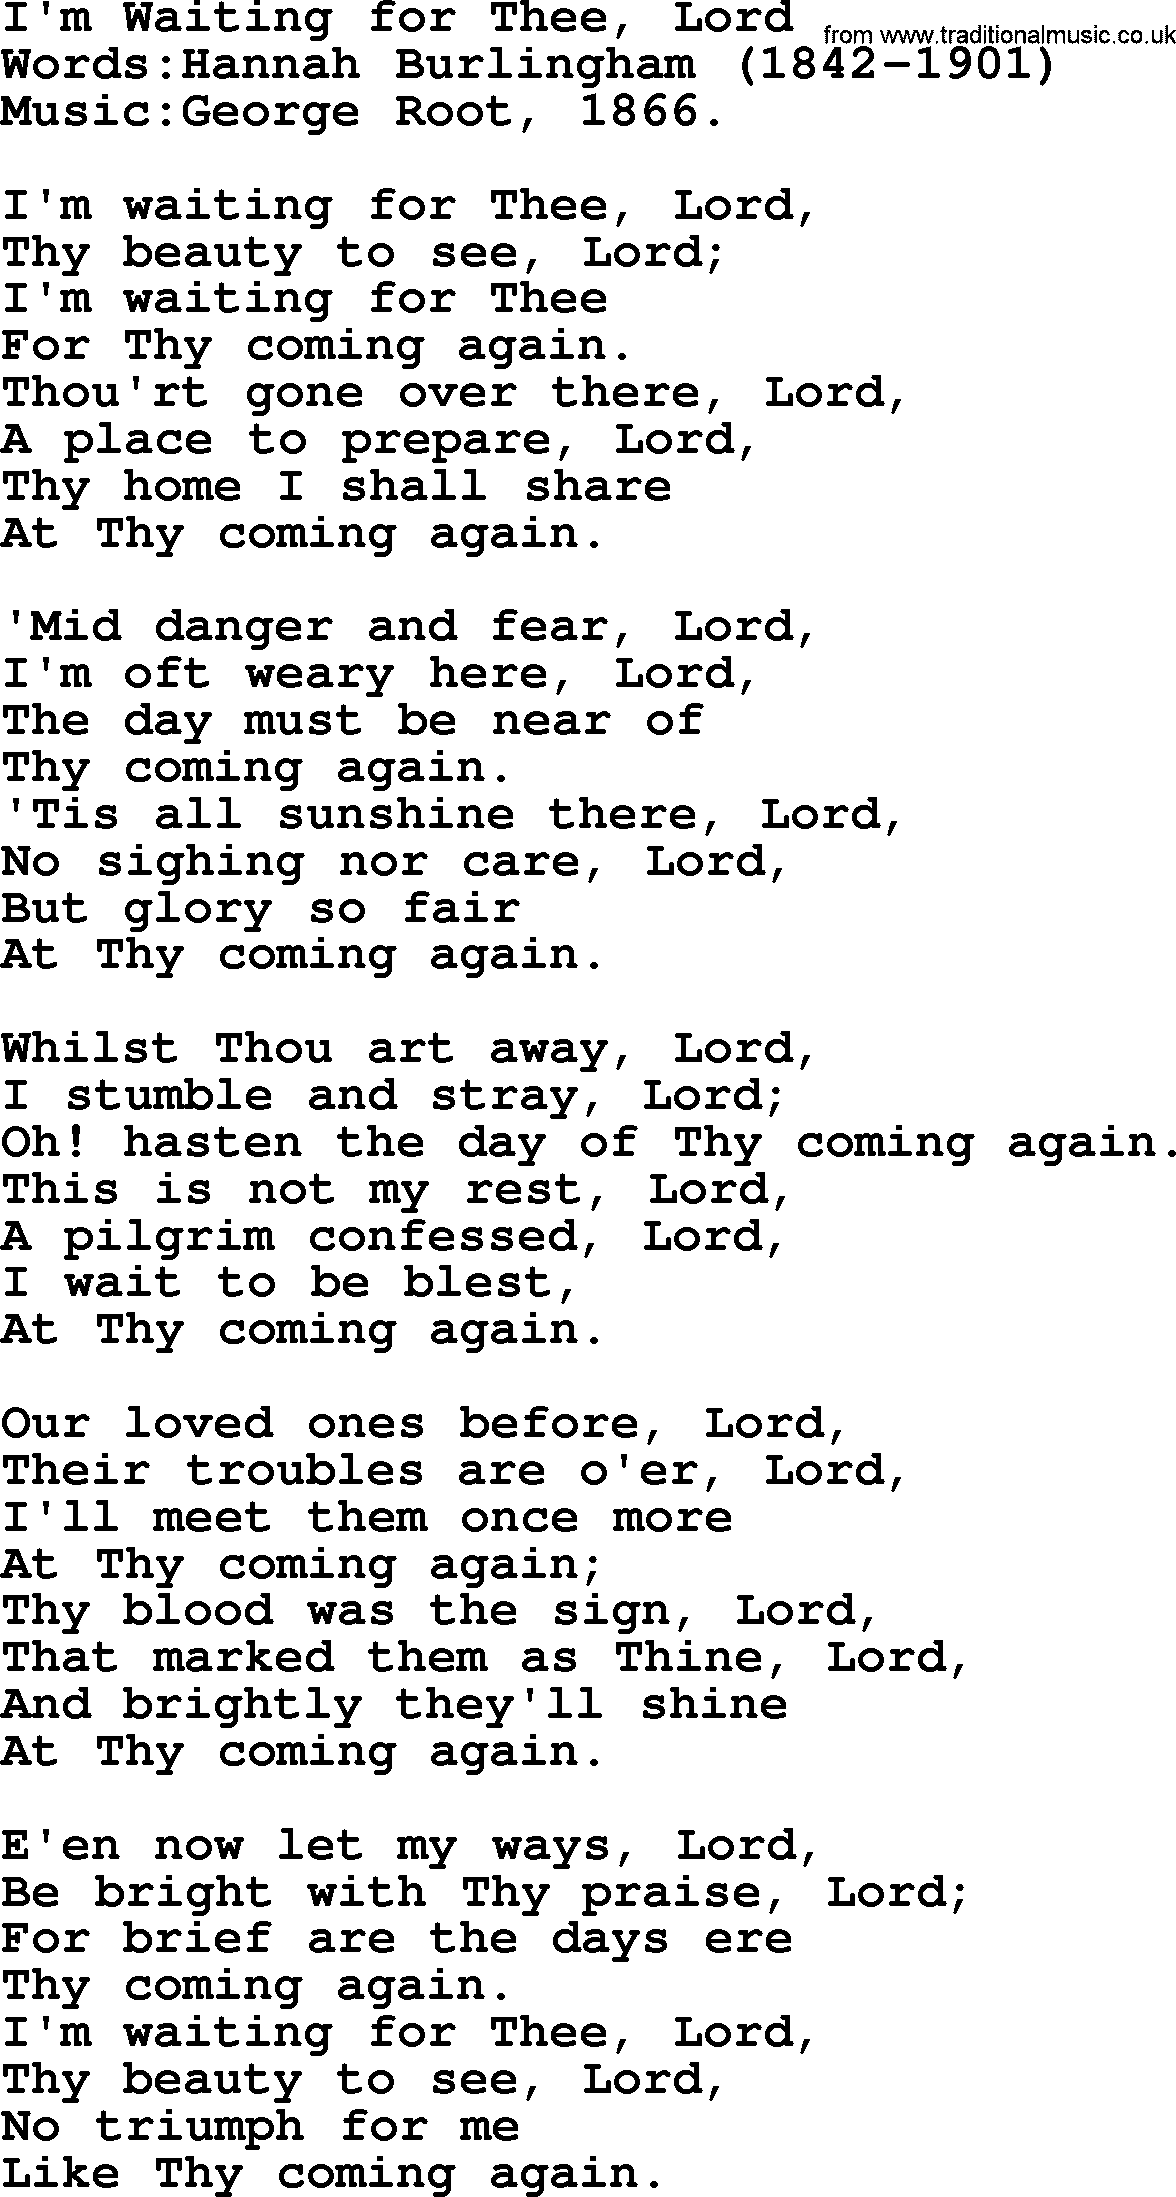 Christian hymns and songs about Jesus' Return(The Second Coming): I'm Waiting For Thee, Lord, lyrics with PDF